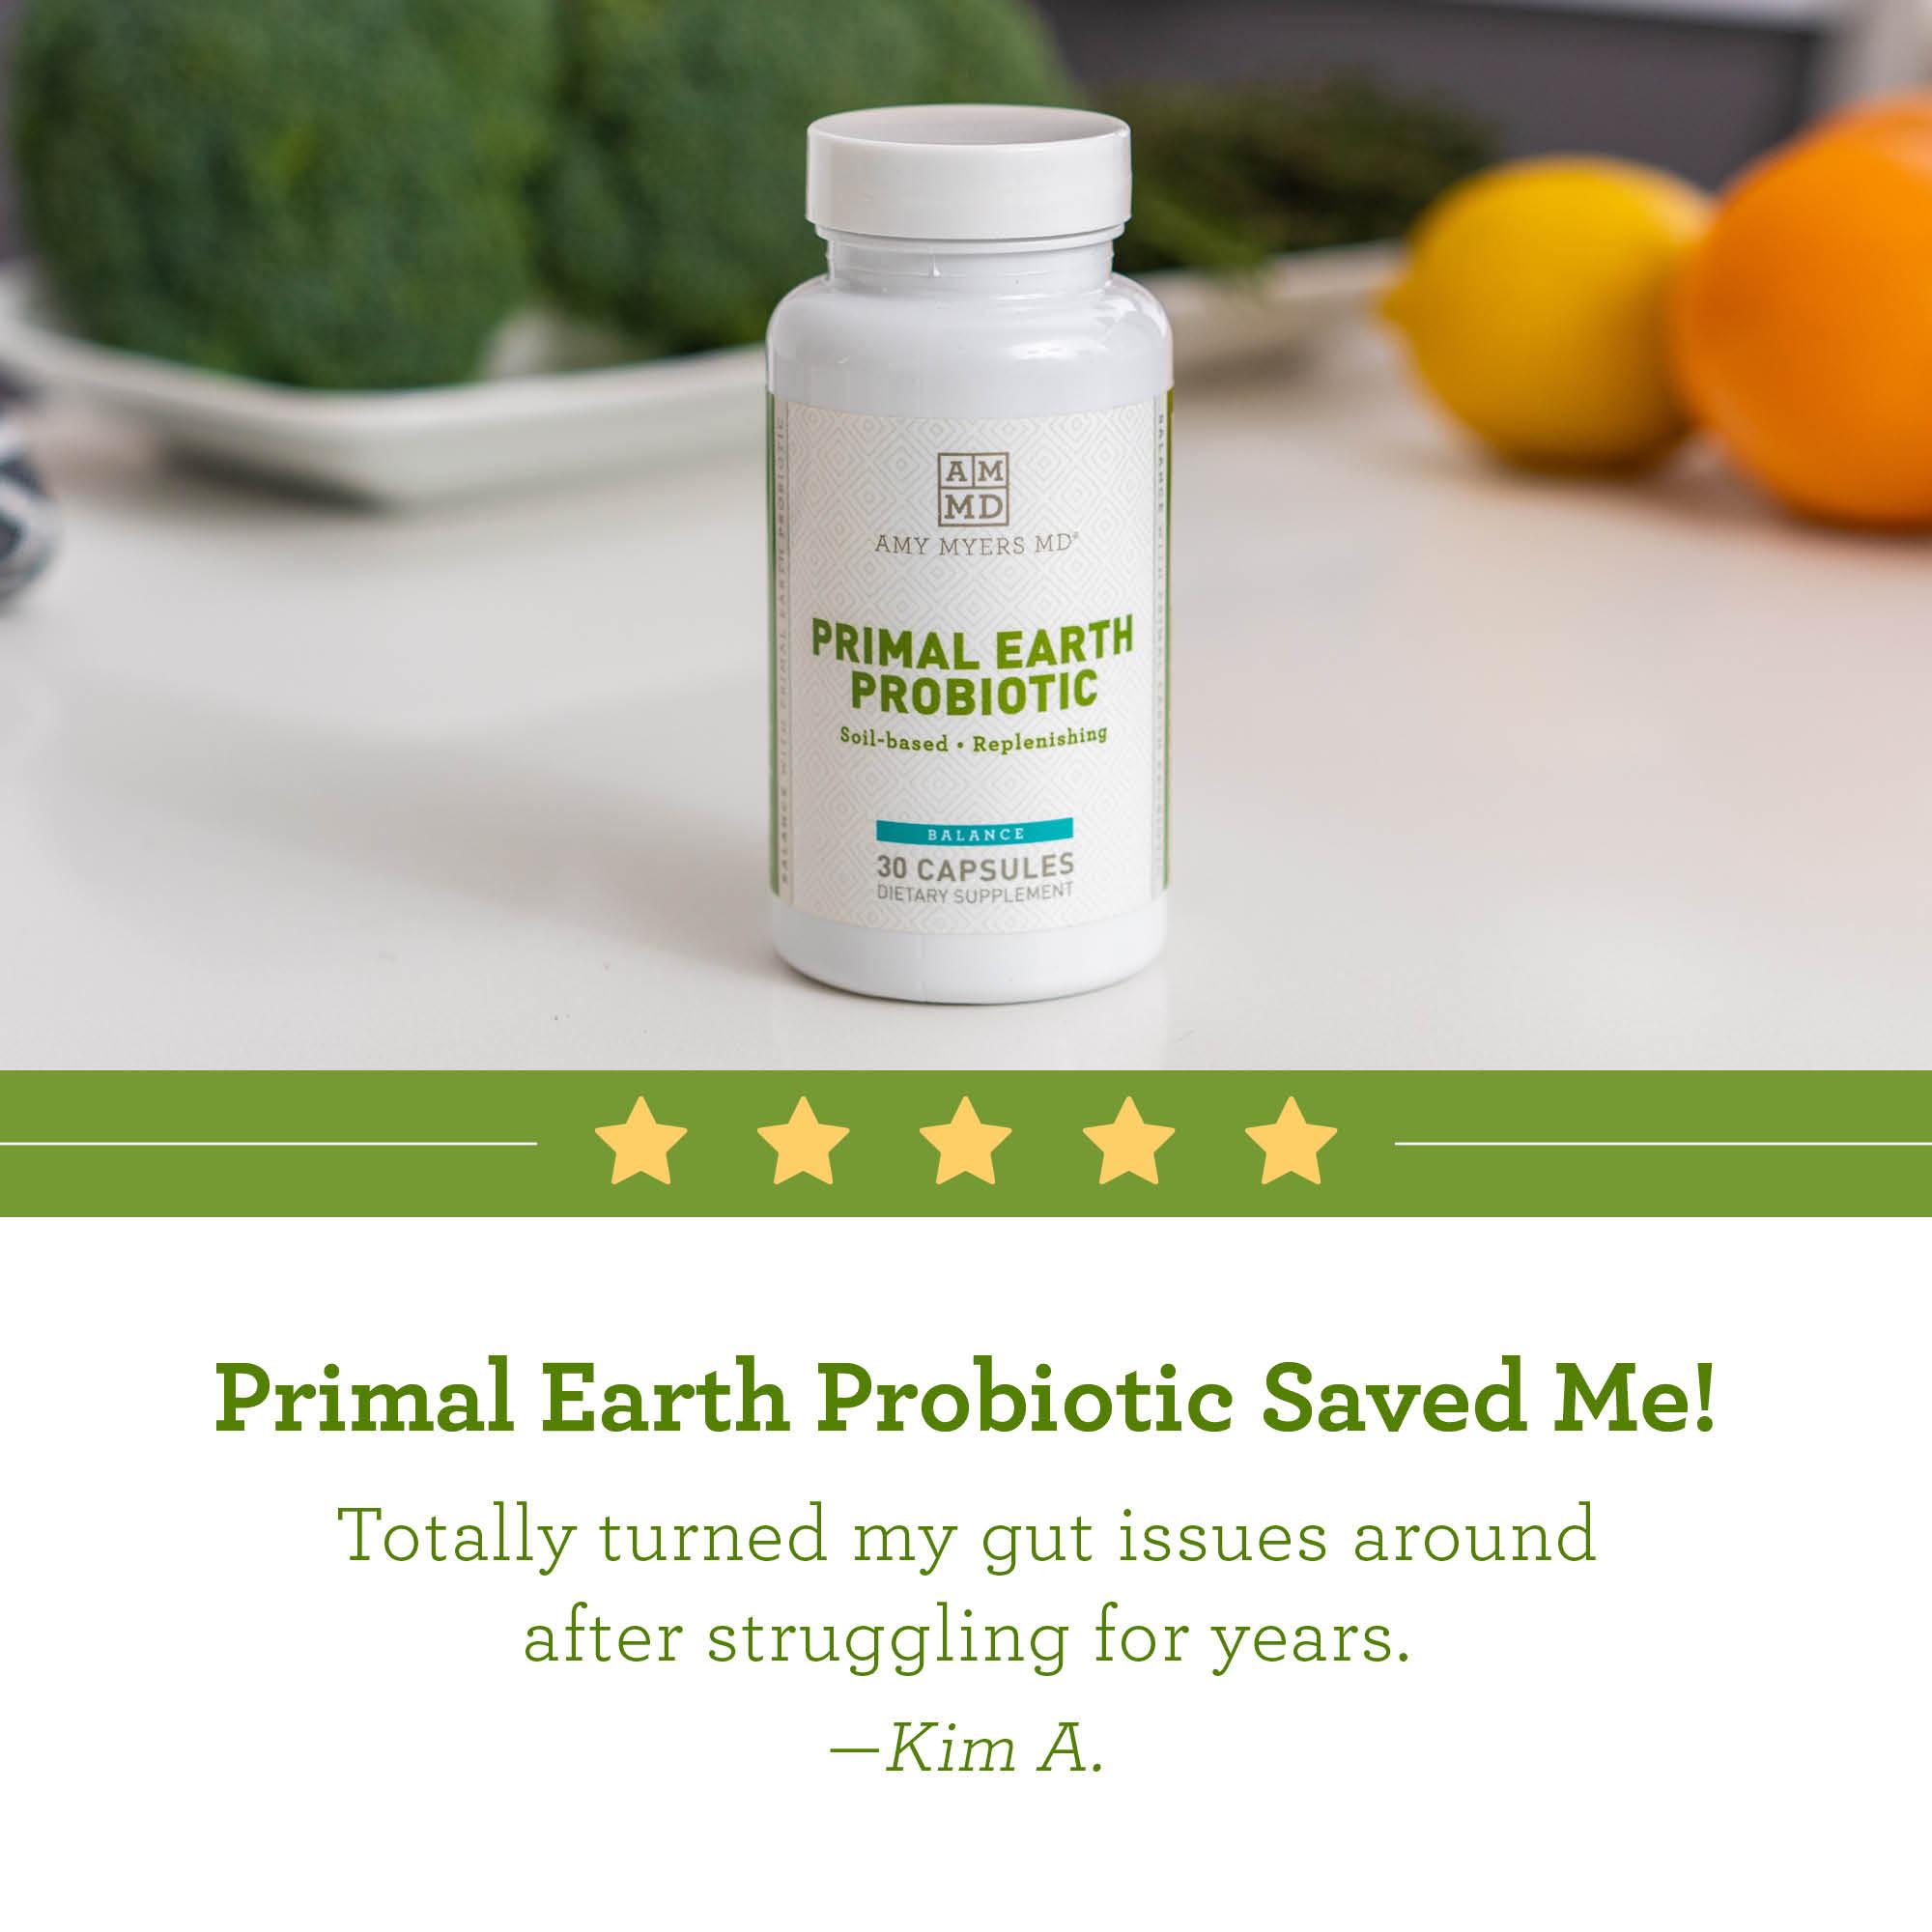 Primal Earth Probiotic Review Image - Amy Myers MD®